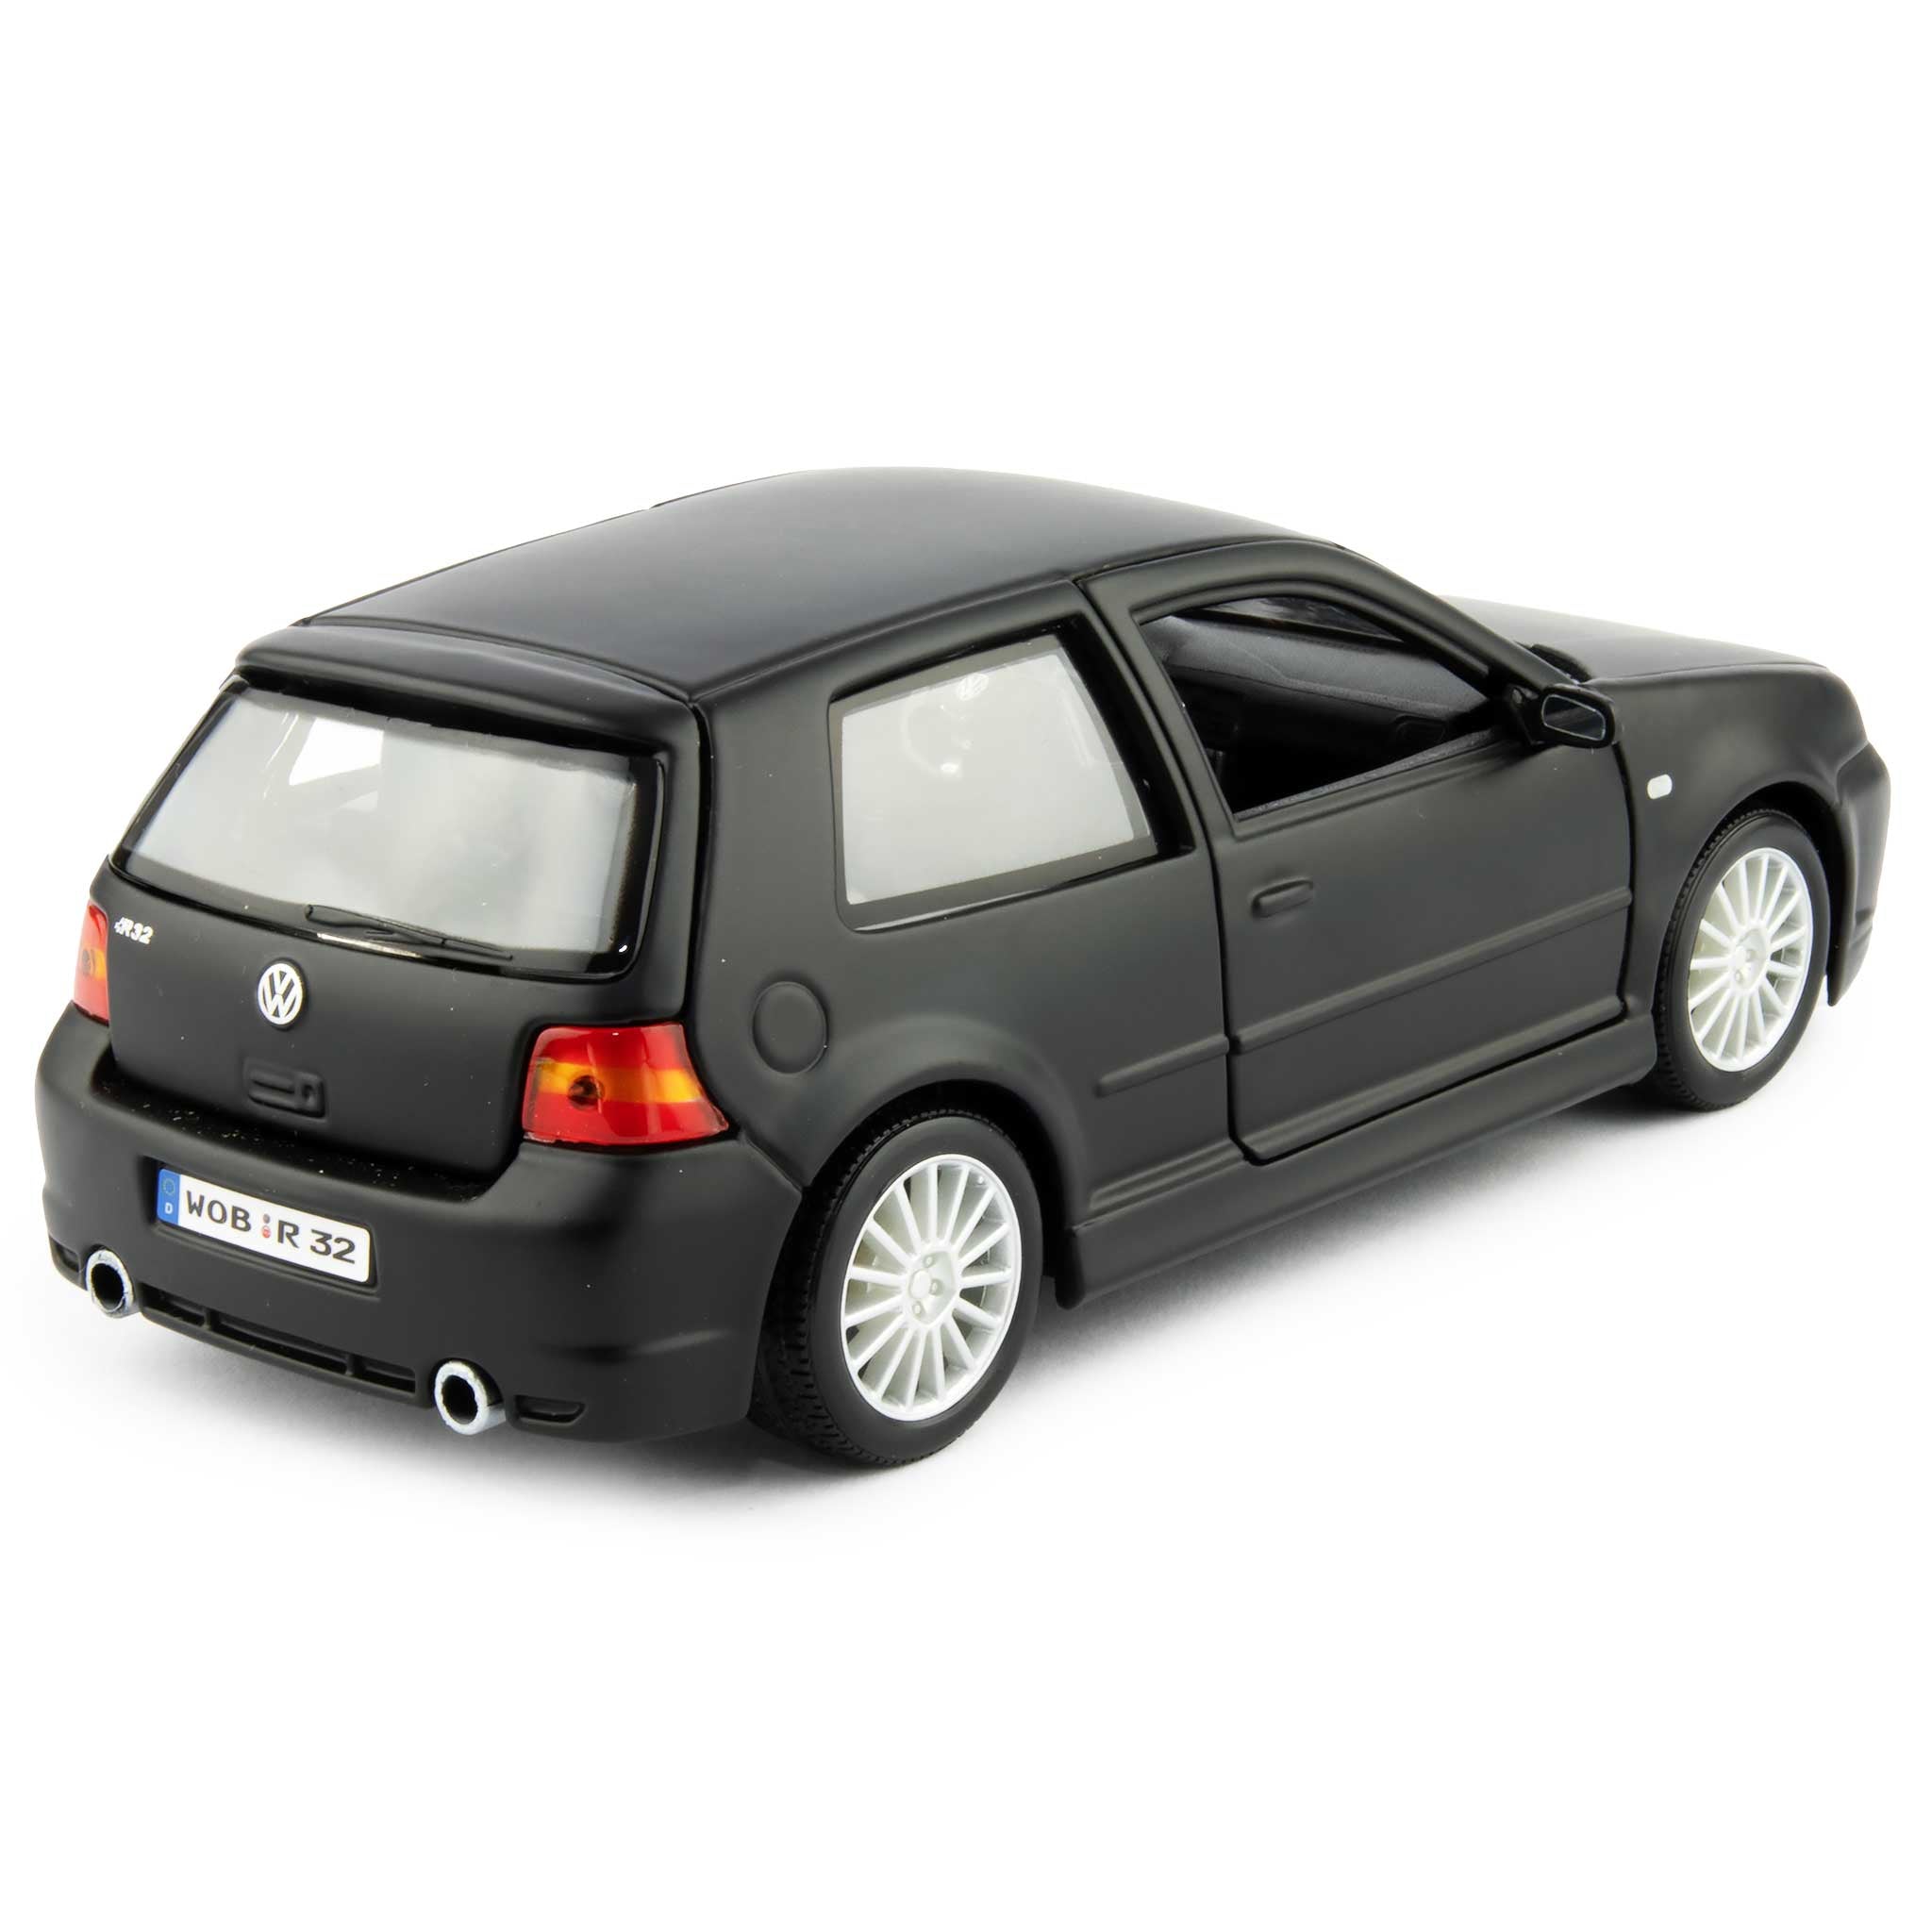 Reproductions for the Golf Mk4 R32: a powerful commitment to a powerful Golf